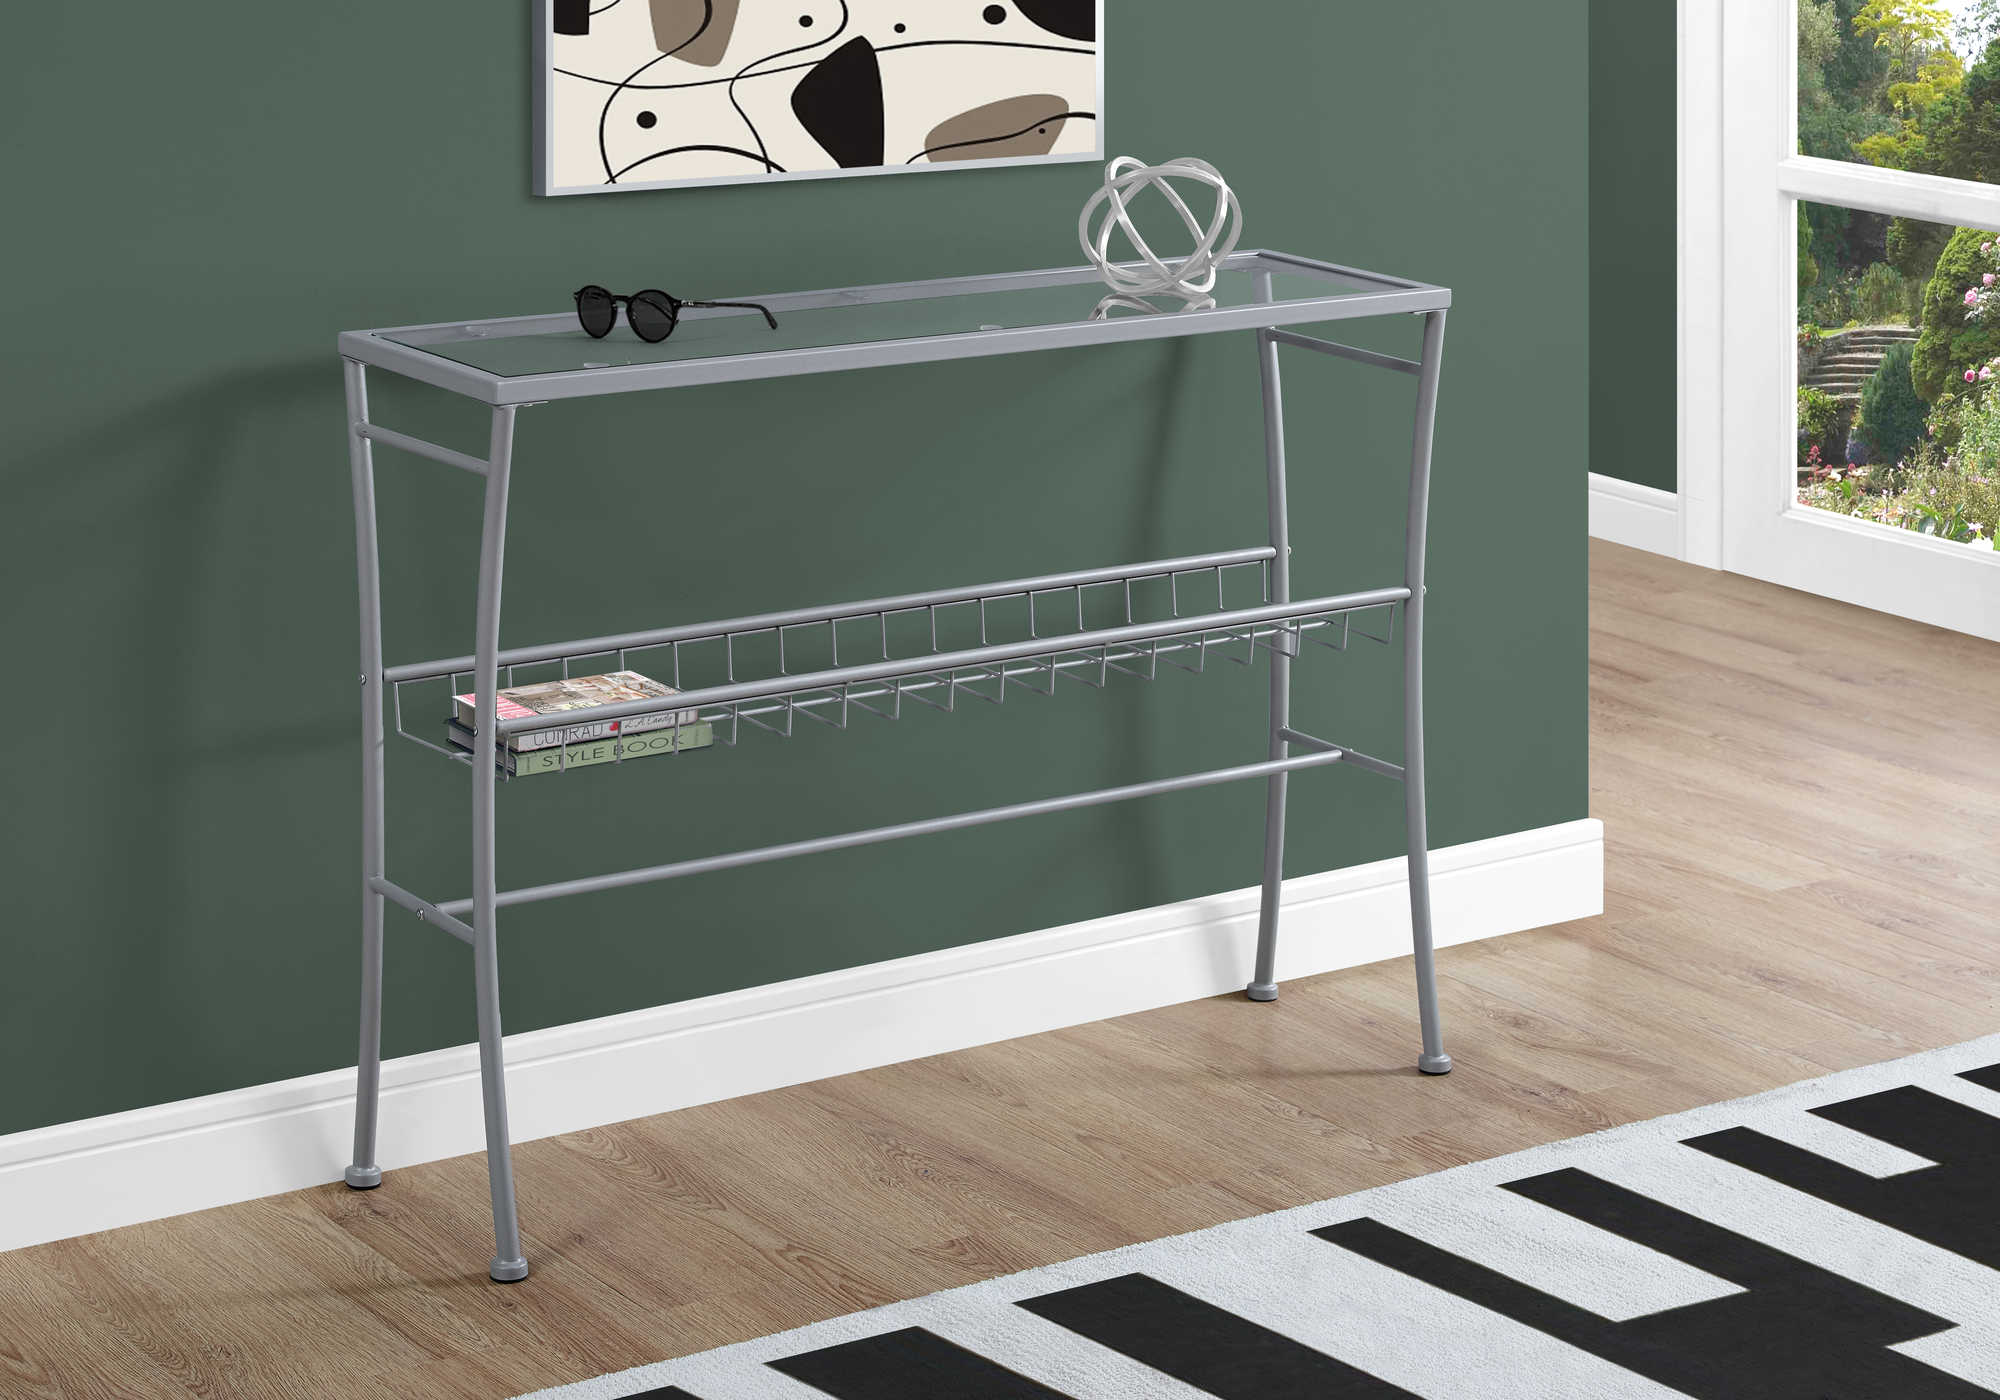 BEDROOM ACCENT CONSOLE TABLE - 42"L / SILVER /TEMPERED GLASS HALL CONSOLE